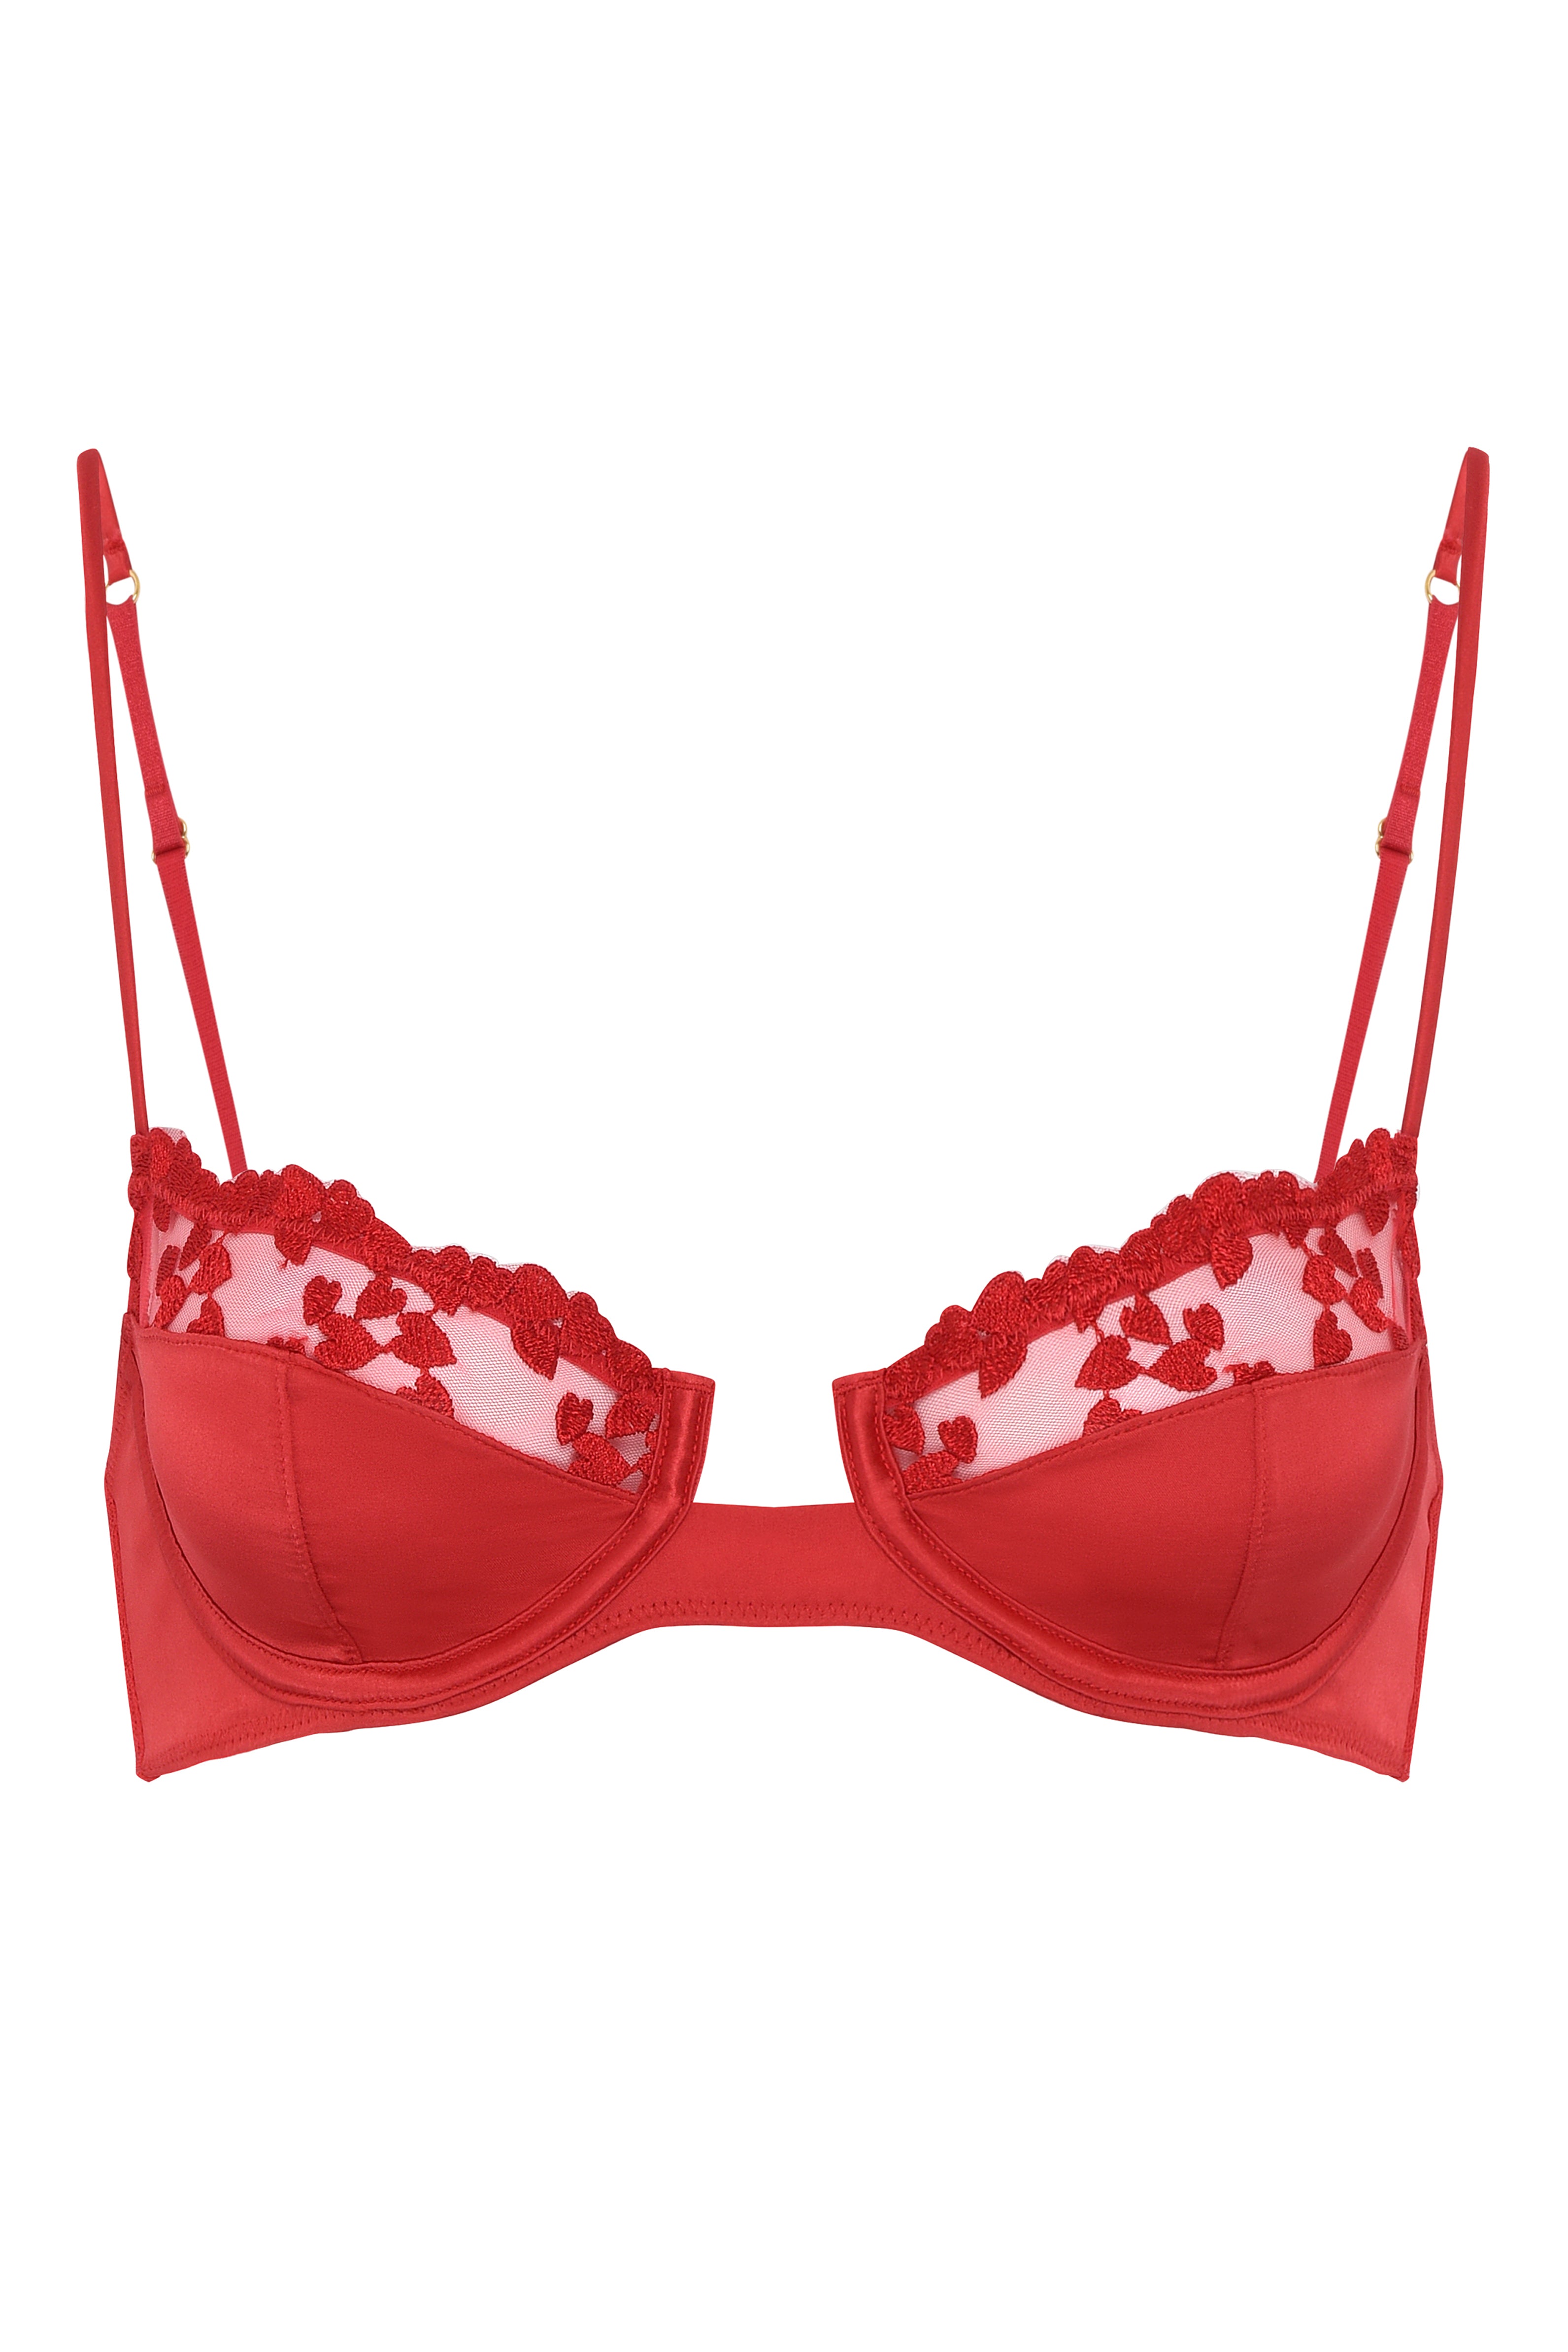 CHERRY BRA | WILD LOVERS X UO OUT FROM UNDER – Wild Lovers